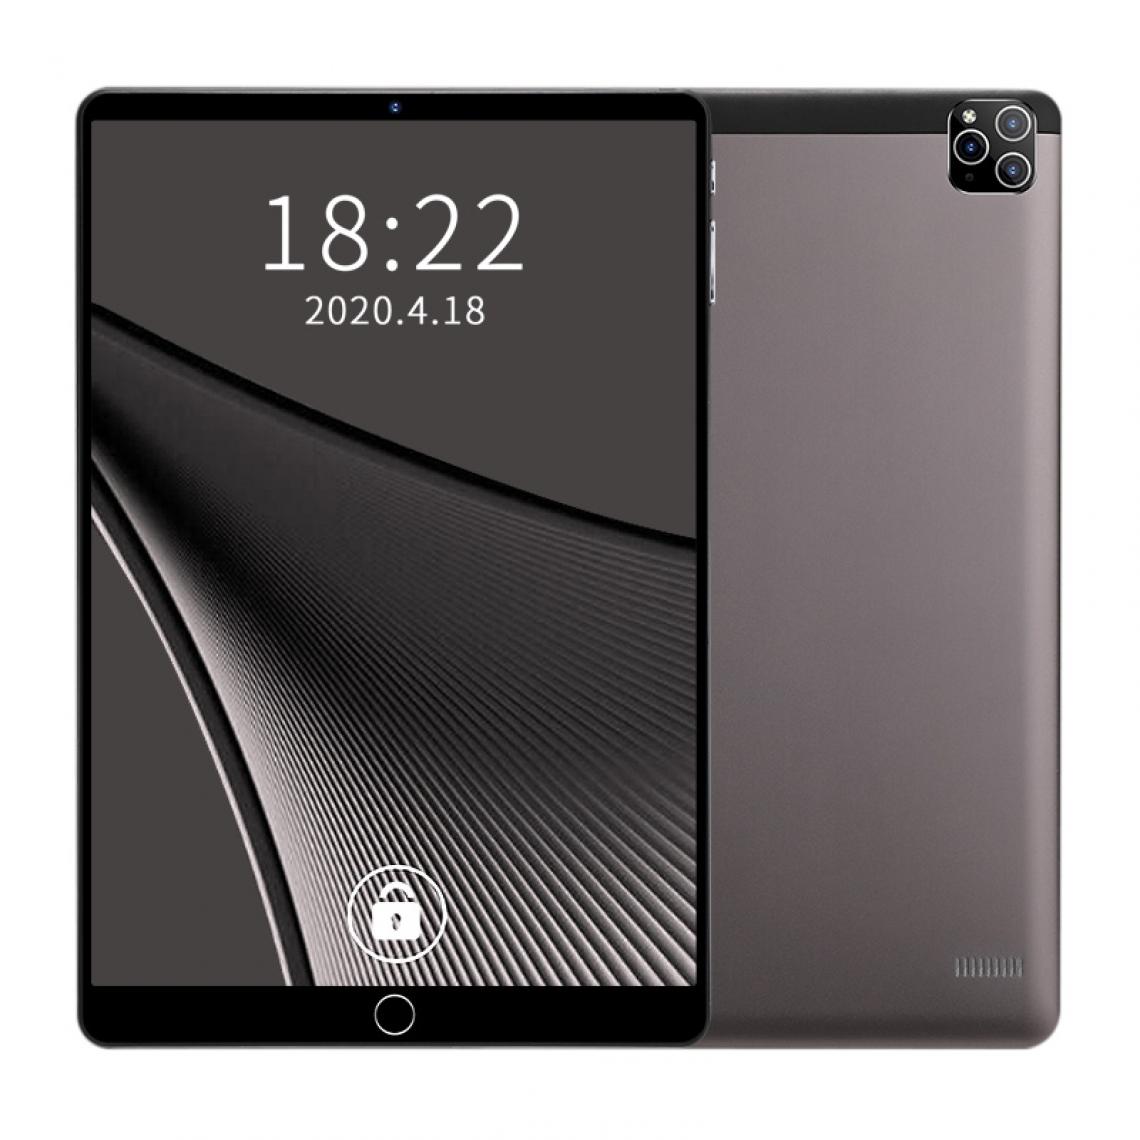 Yonis - Tablette 4G Android 9.0 - Tablette Android